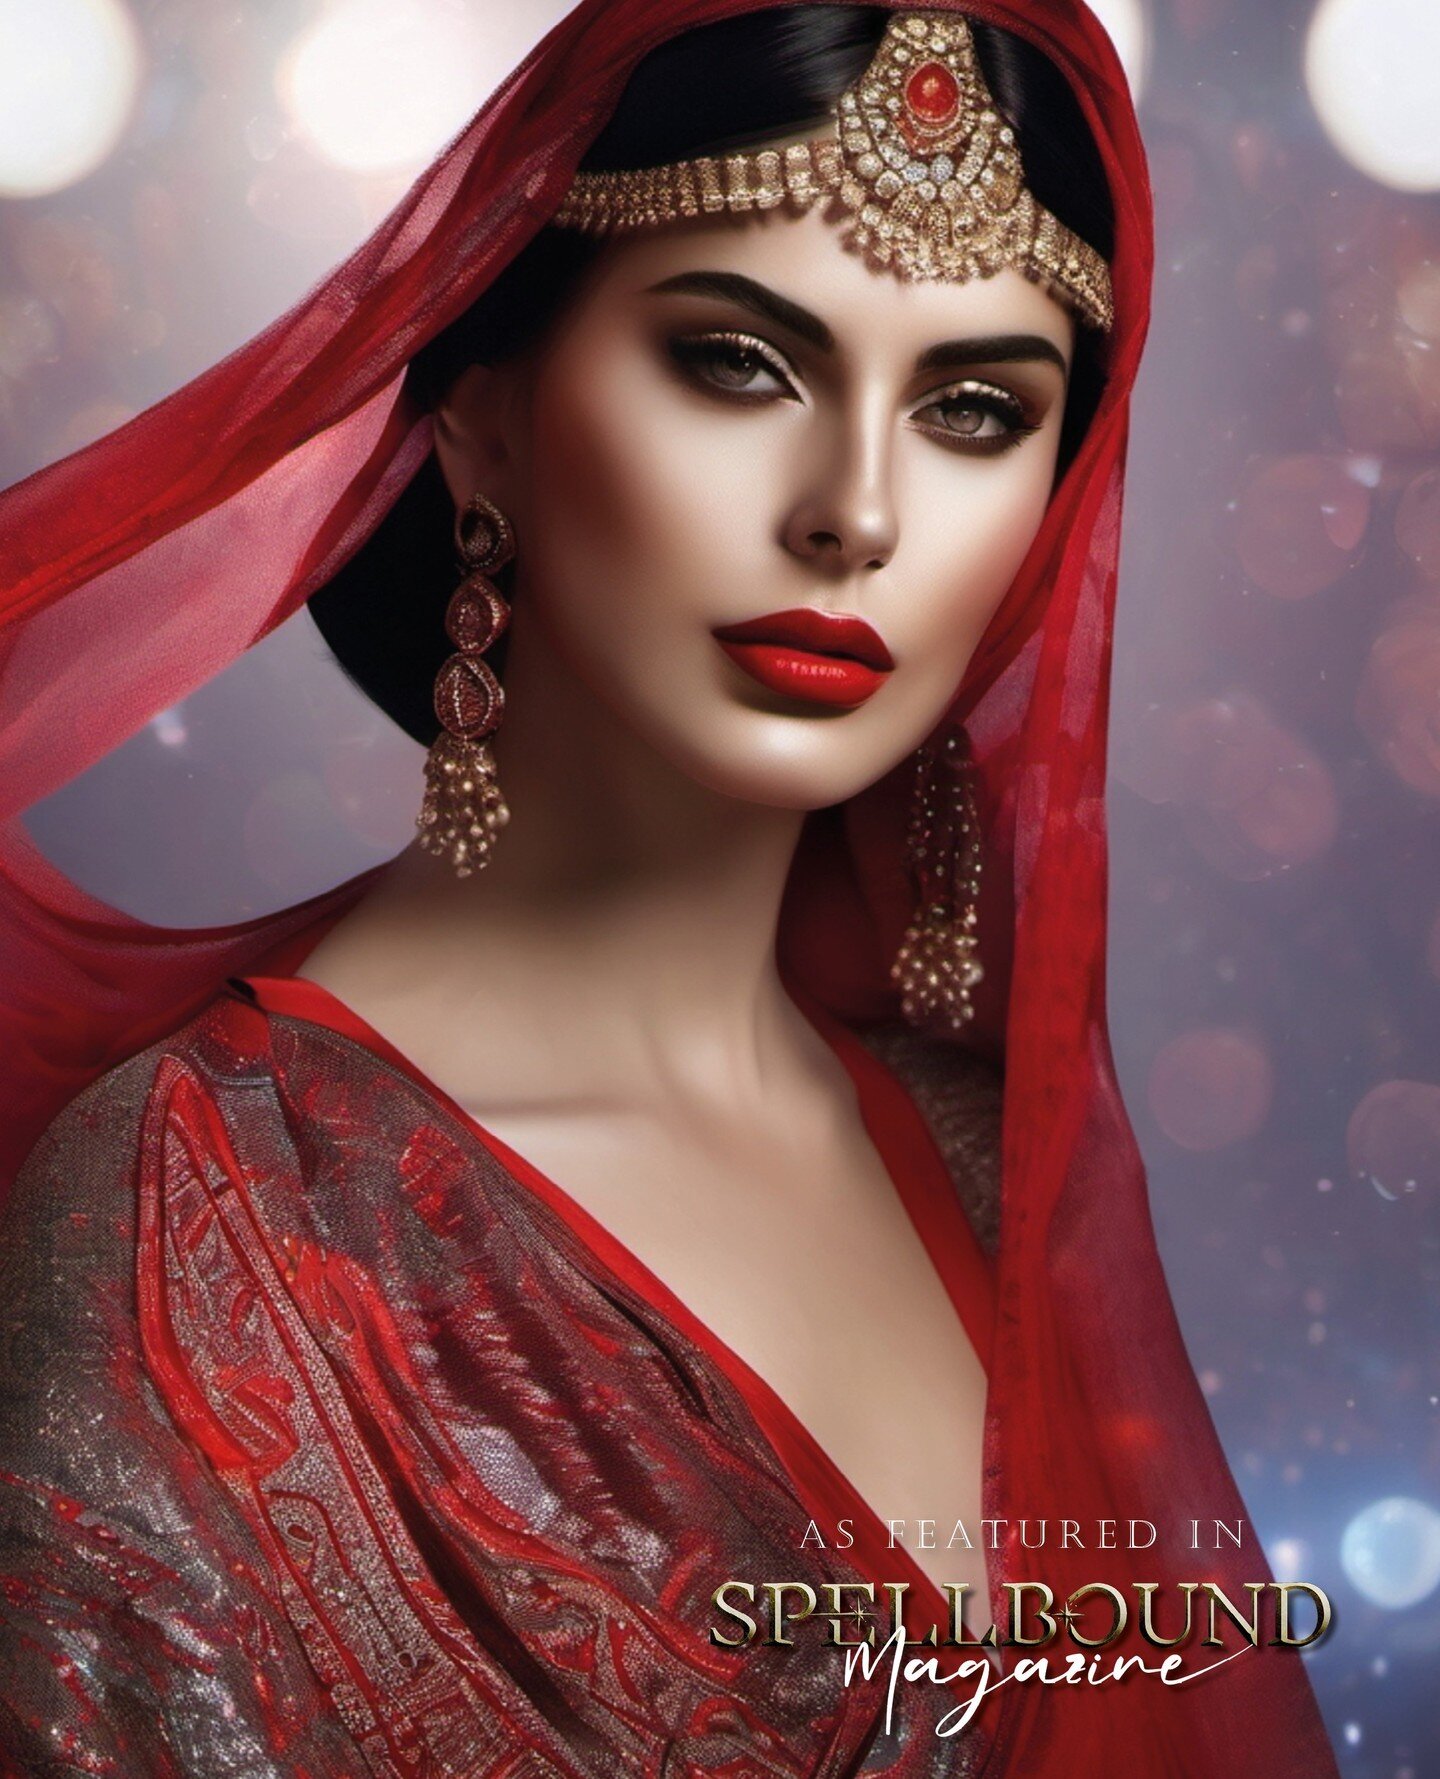 Persian Red ⭐🔝⁠
⁠
AI Artist: Malika Turhanova⁠
IG: @lica_turhan⁠
WB: licamtapictures.deviantart.com⁠
Publication: @swankyspellboundmagazine⁠
⁠
Step into the magical world of enchanted realms ✨✨✨ Immerse yourself in a world of imagination and creativ